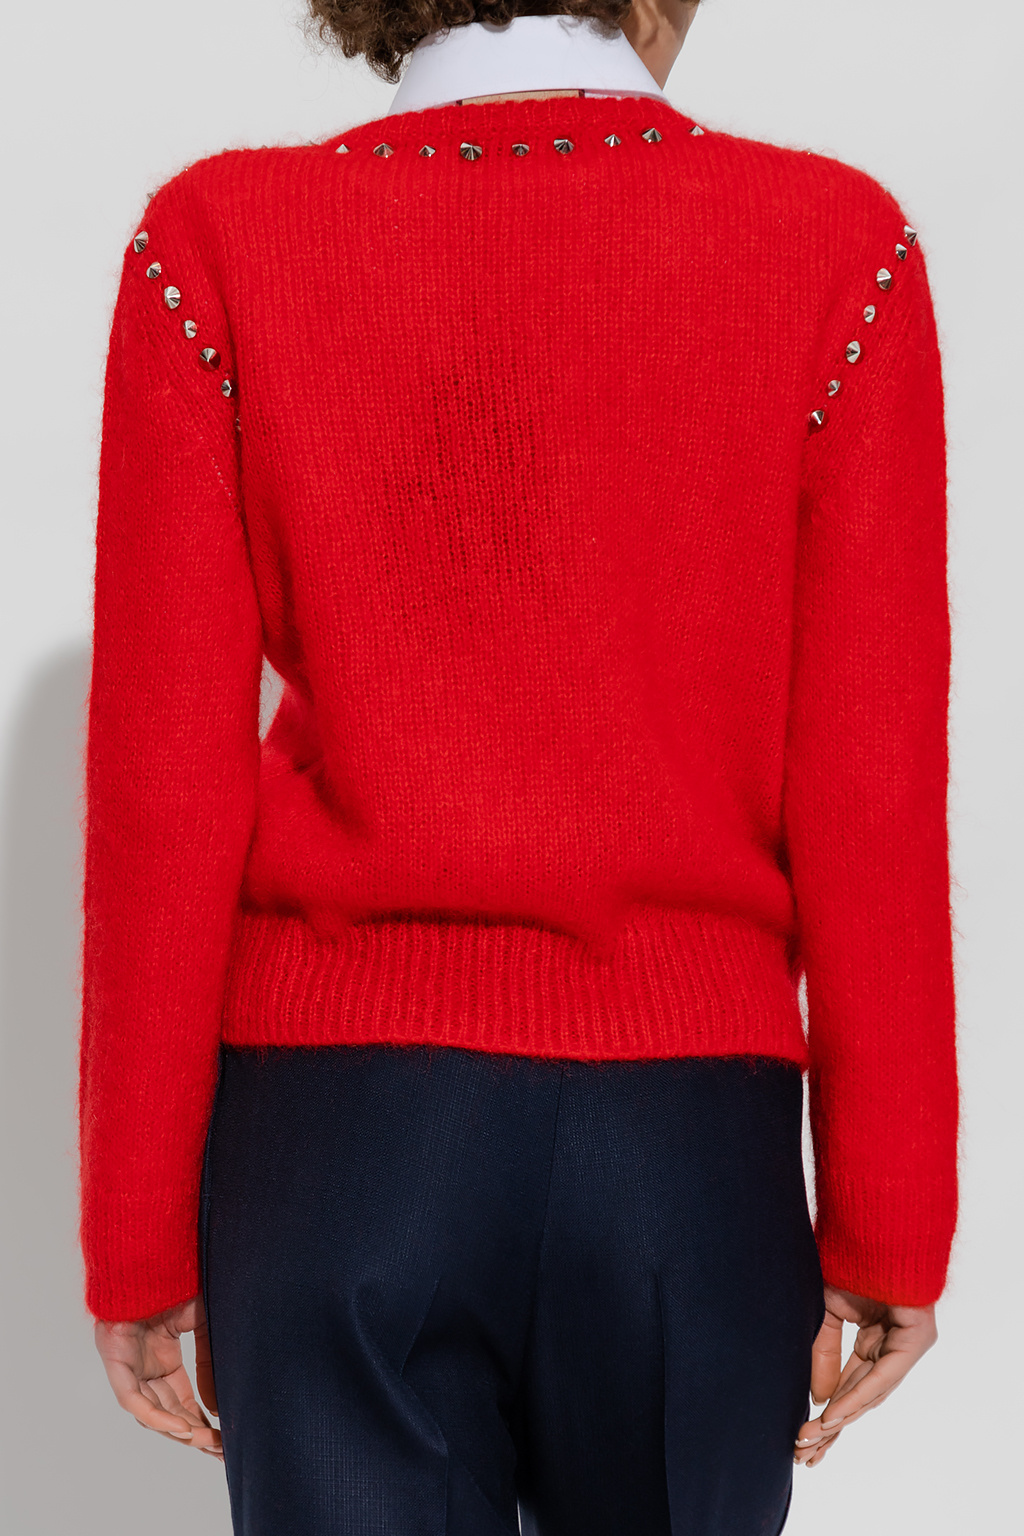 Gucci Studded sweater